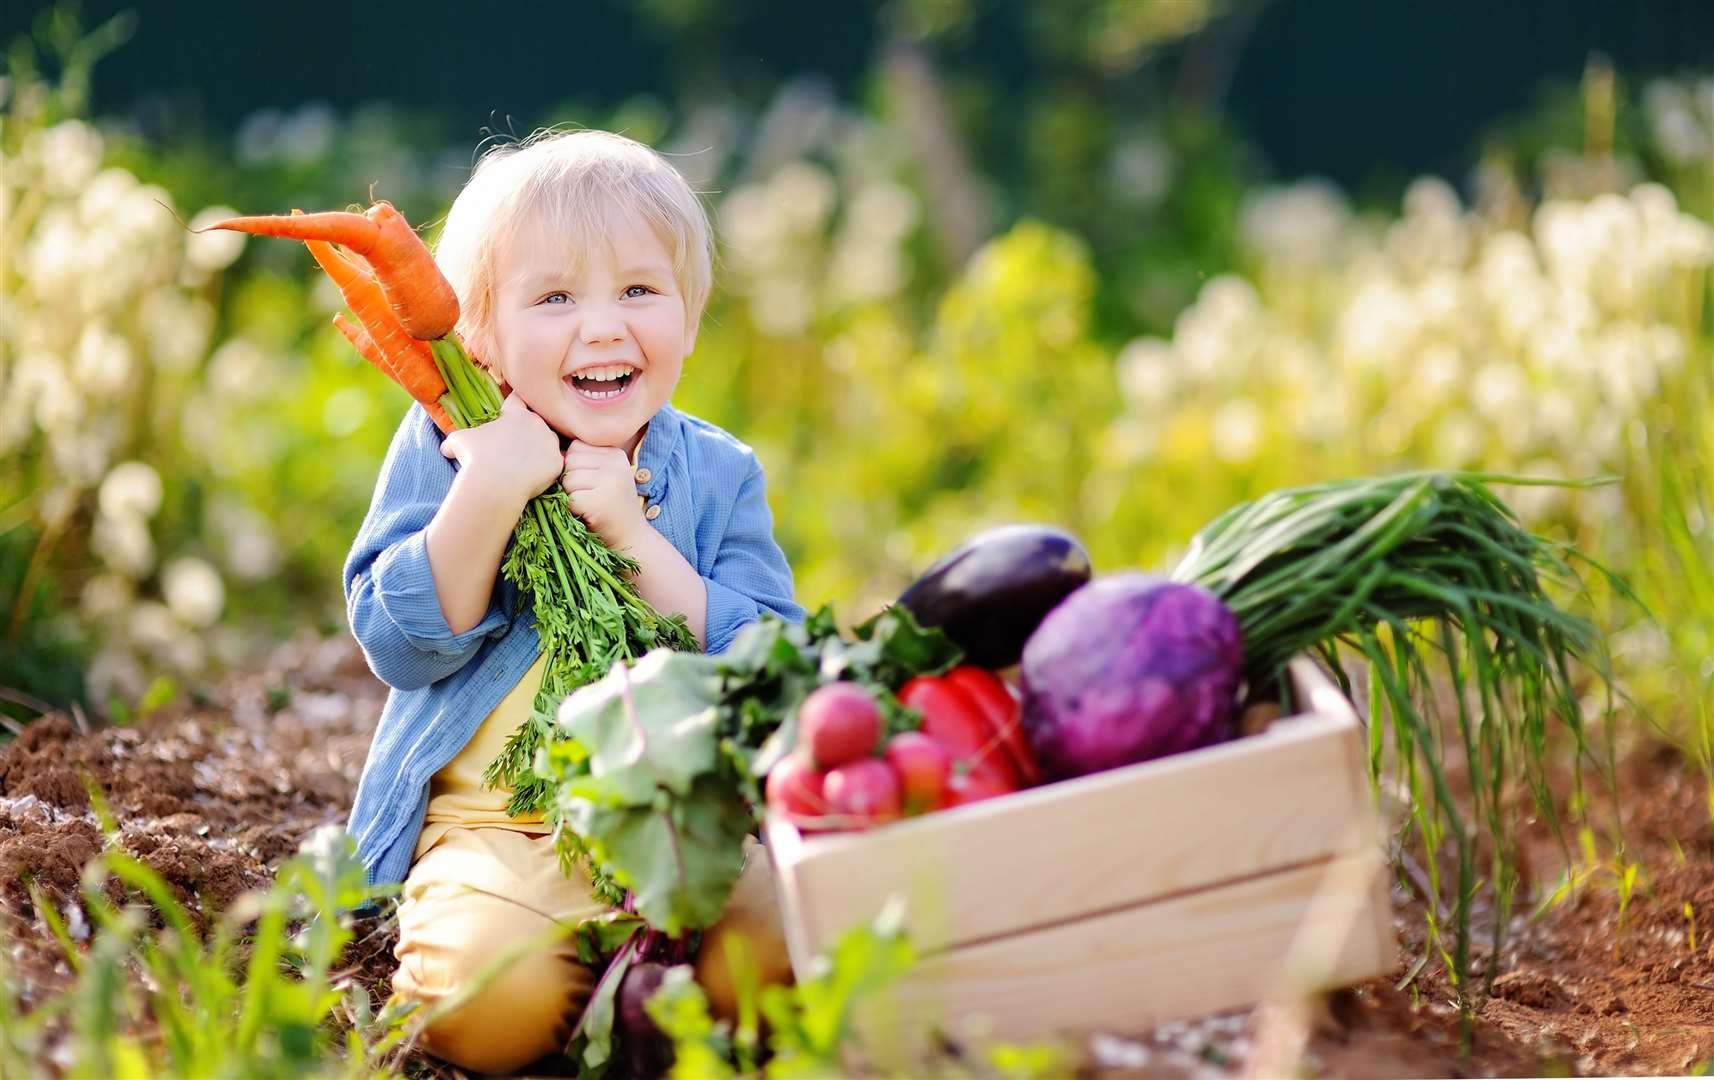 Learn more about vegetable growing for all ages.